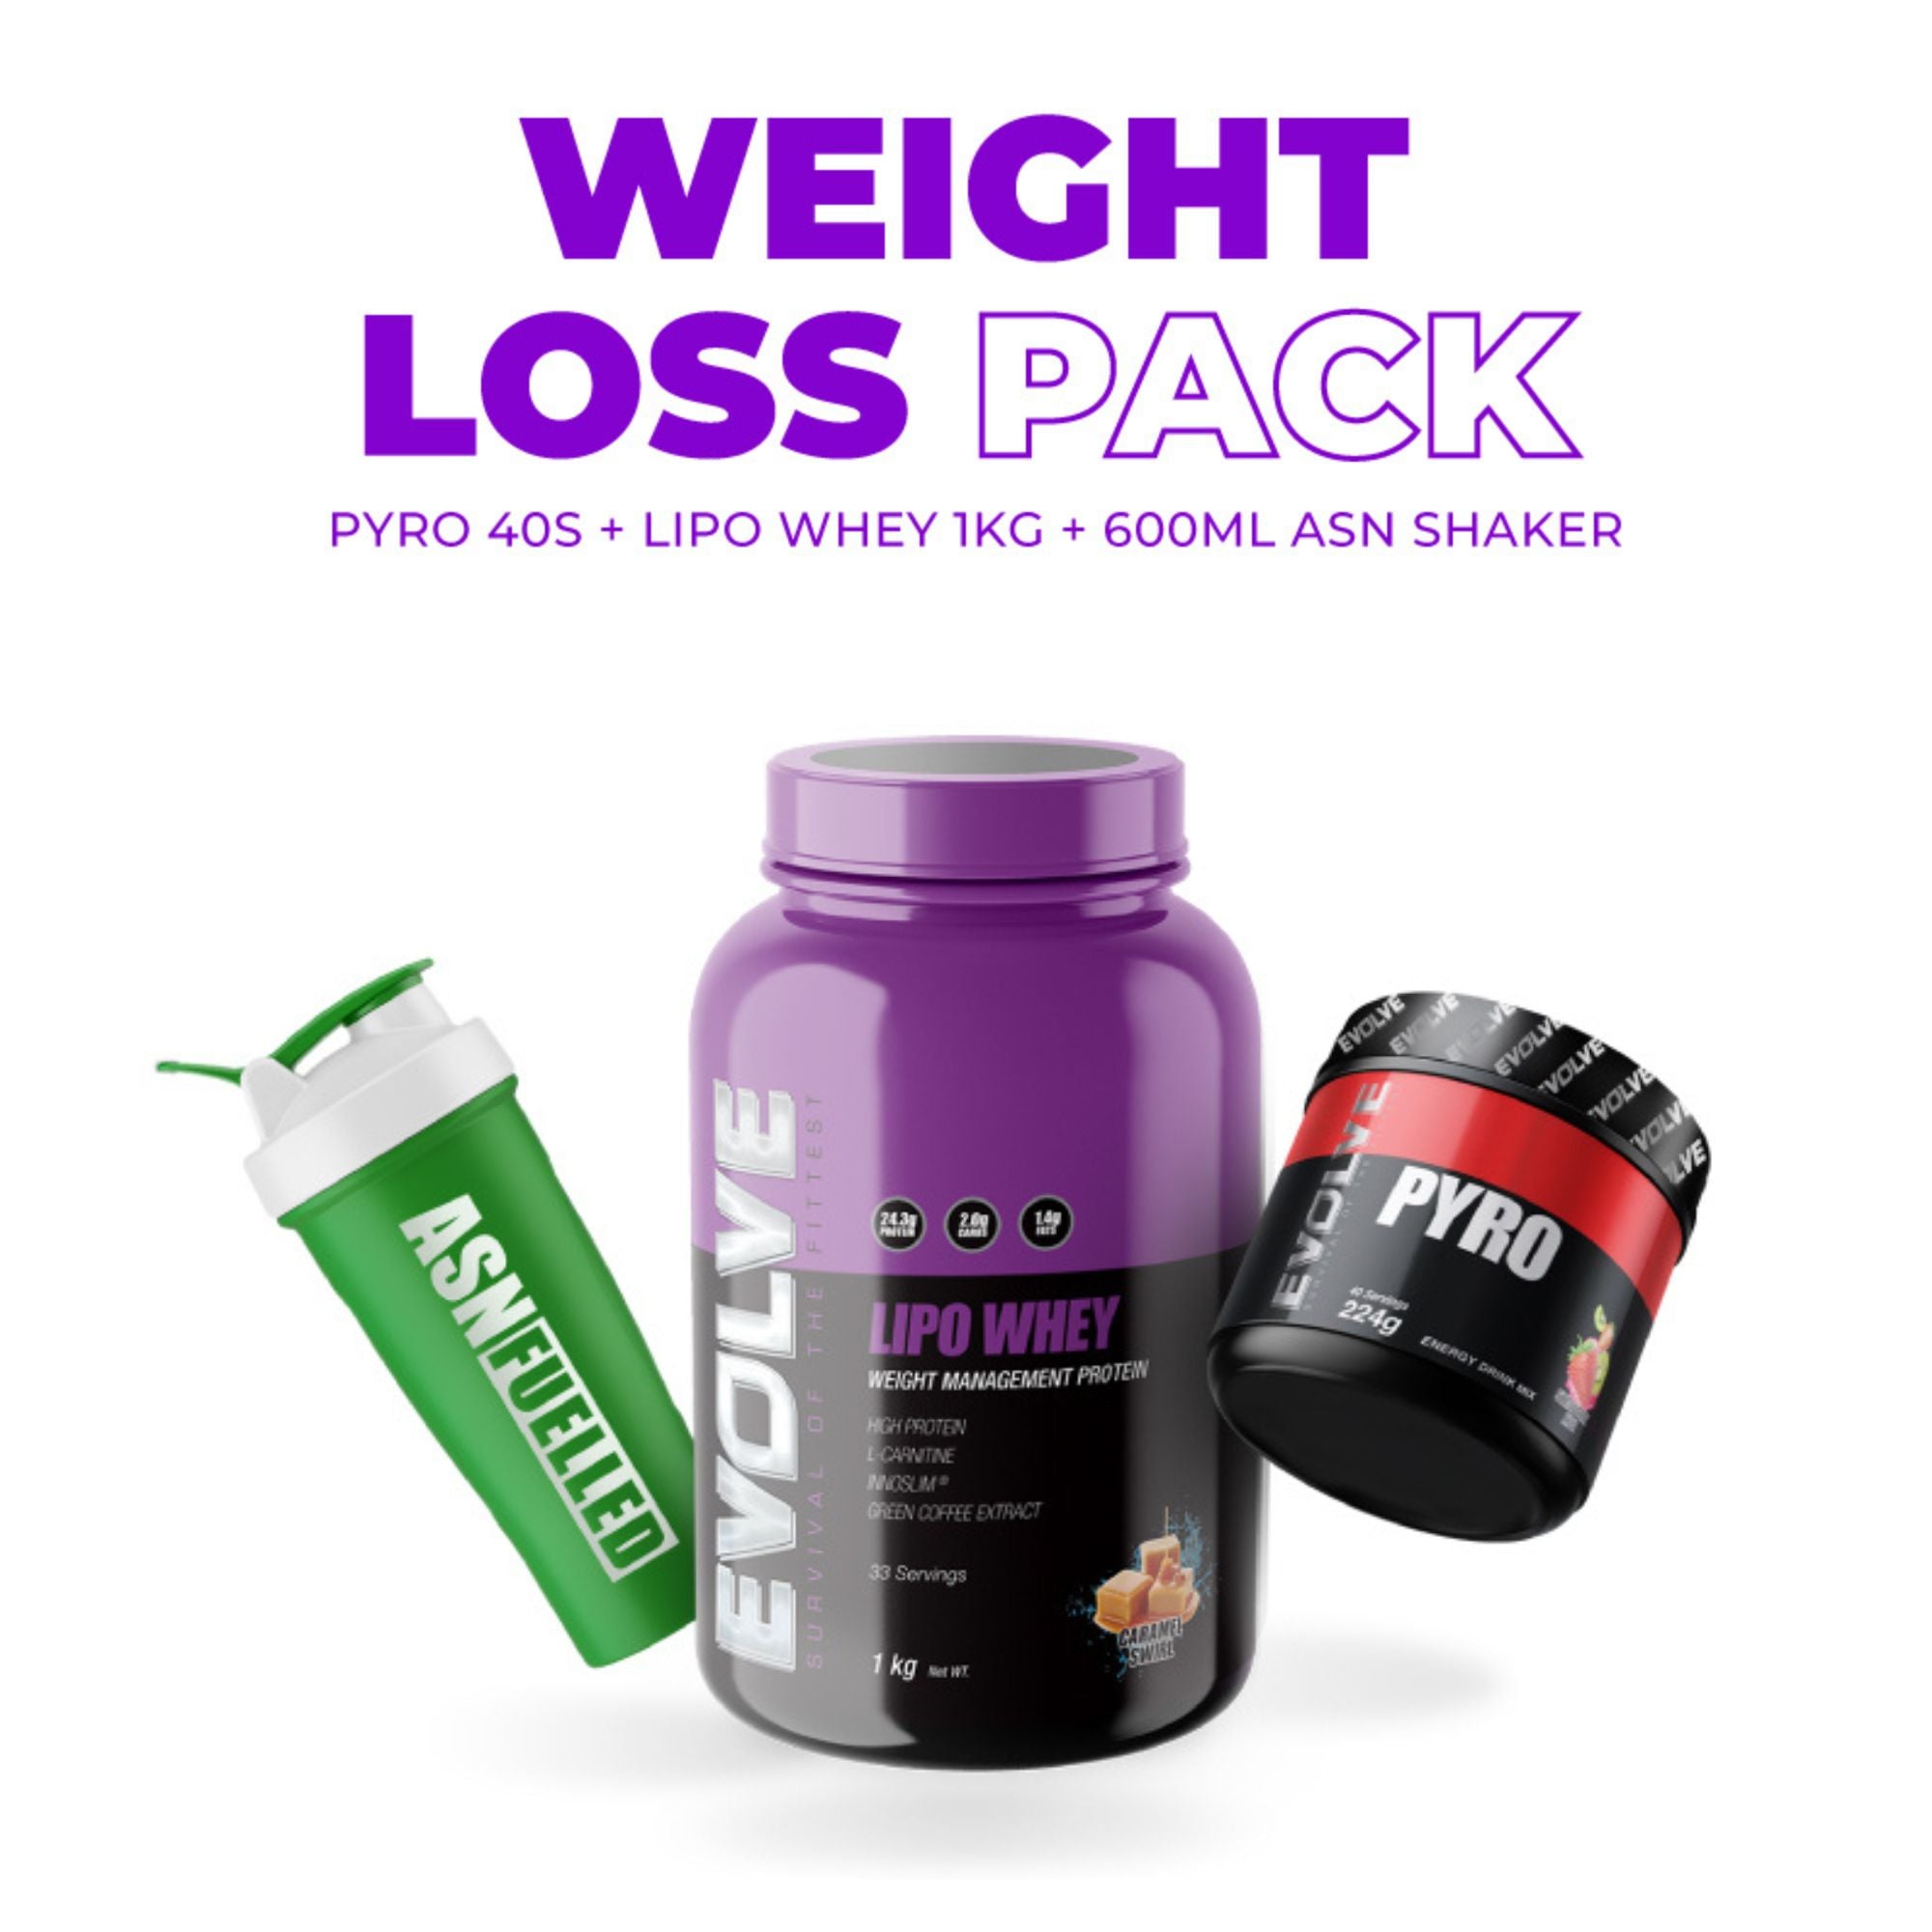 Jake Campus Basic Weight Loss Pack